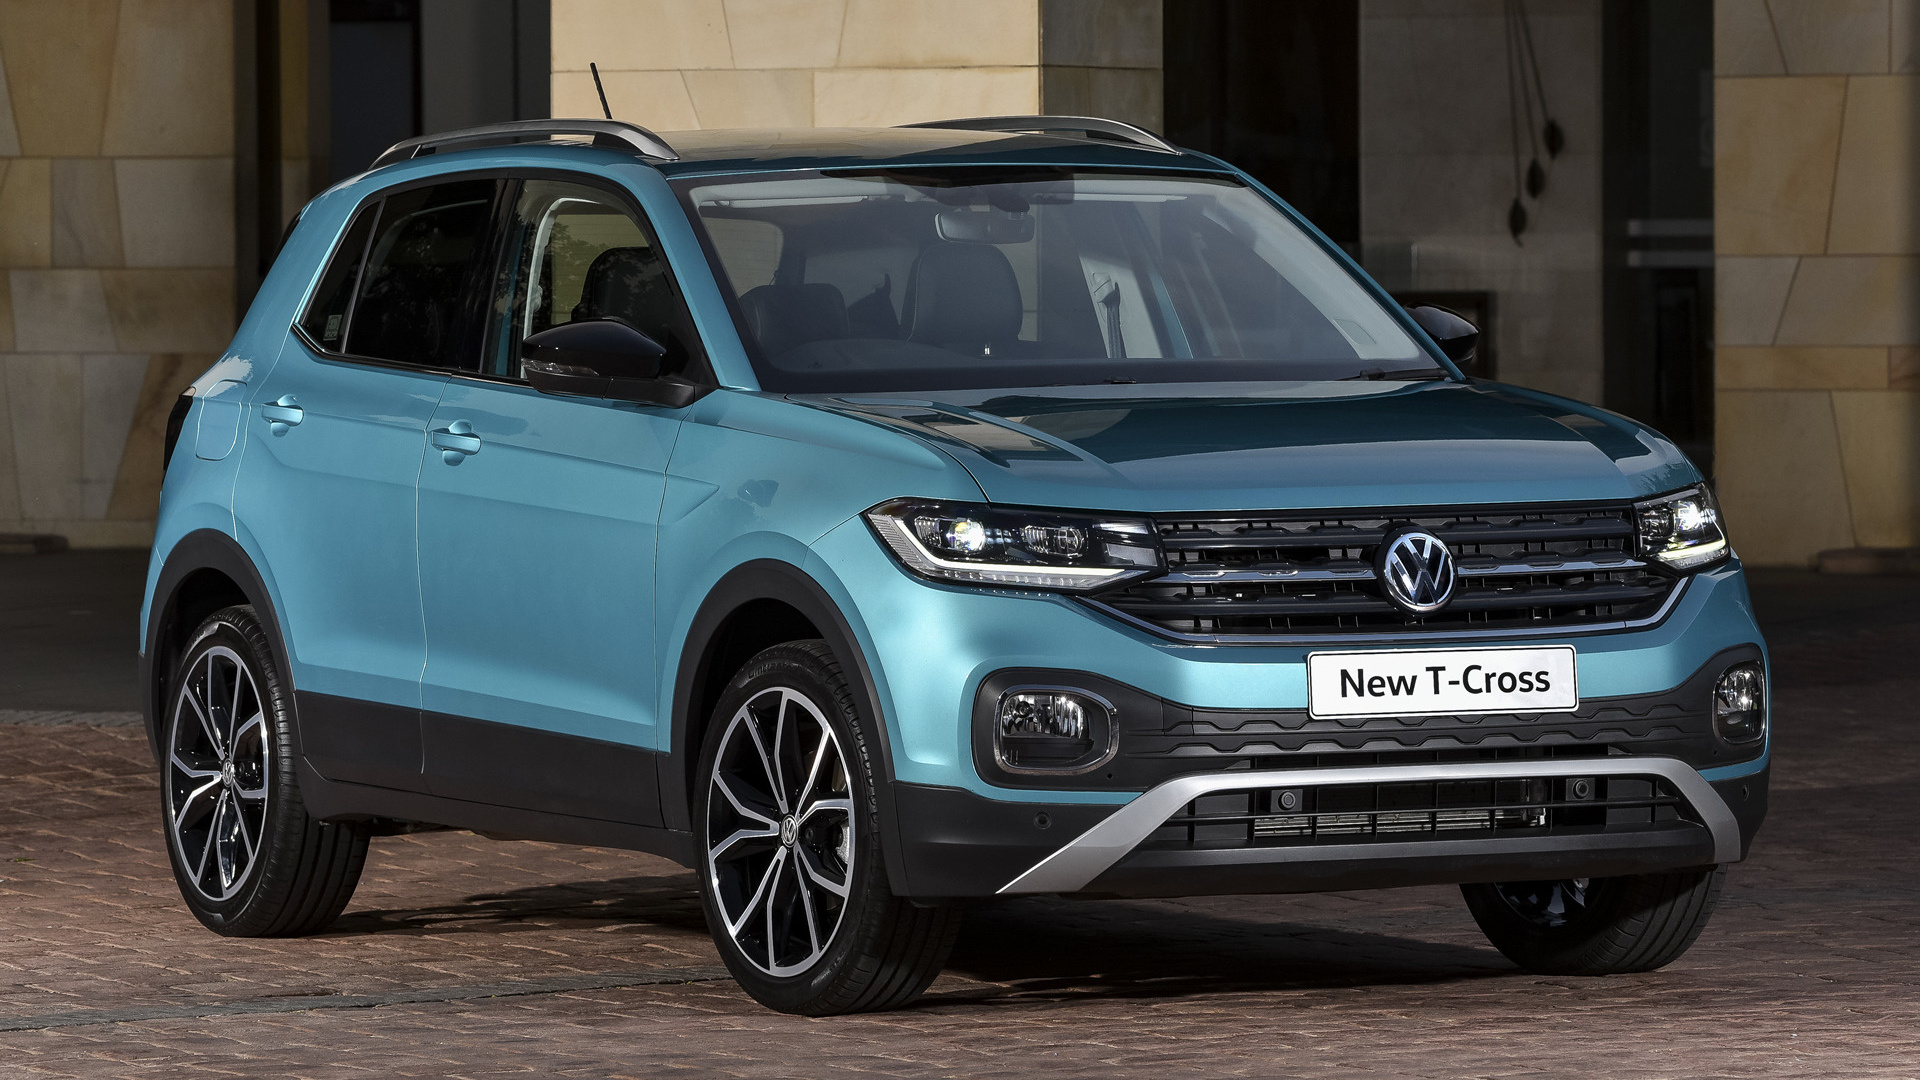 2019 Volkswagen T-Cross (ZA) - Wallpapers and HD Images ...